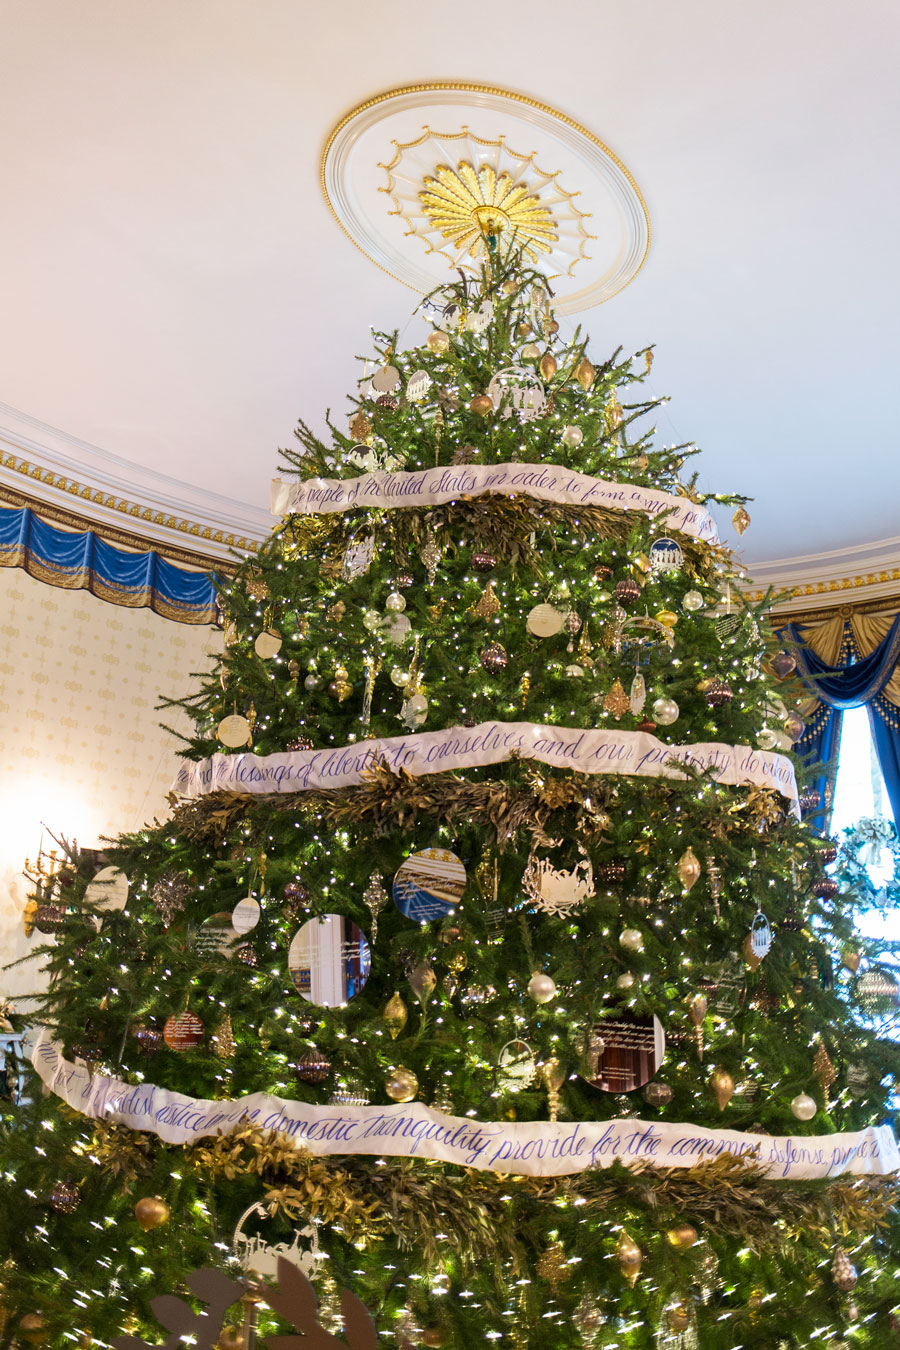 This year's iconic Blue Room Christmas Tree celebrates 